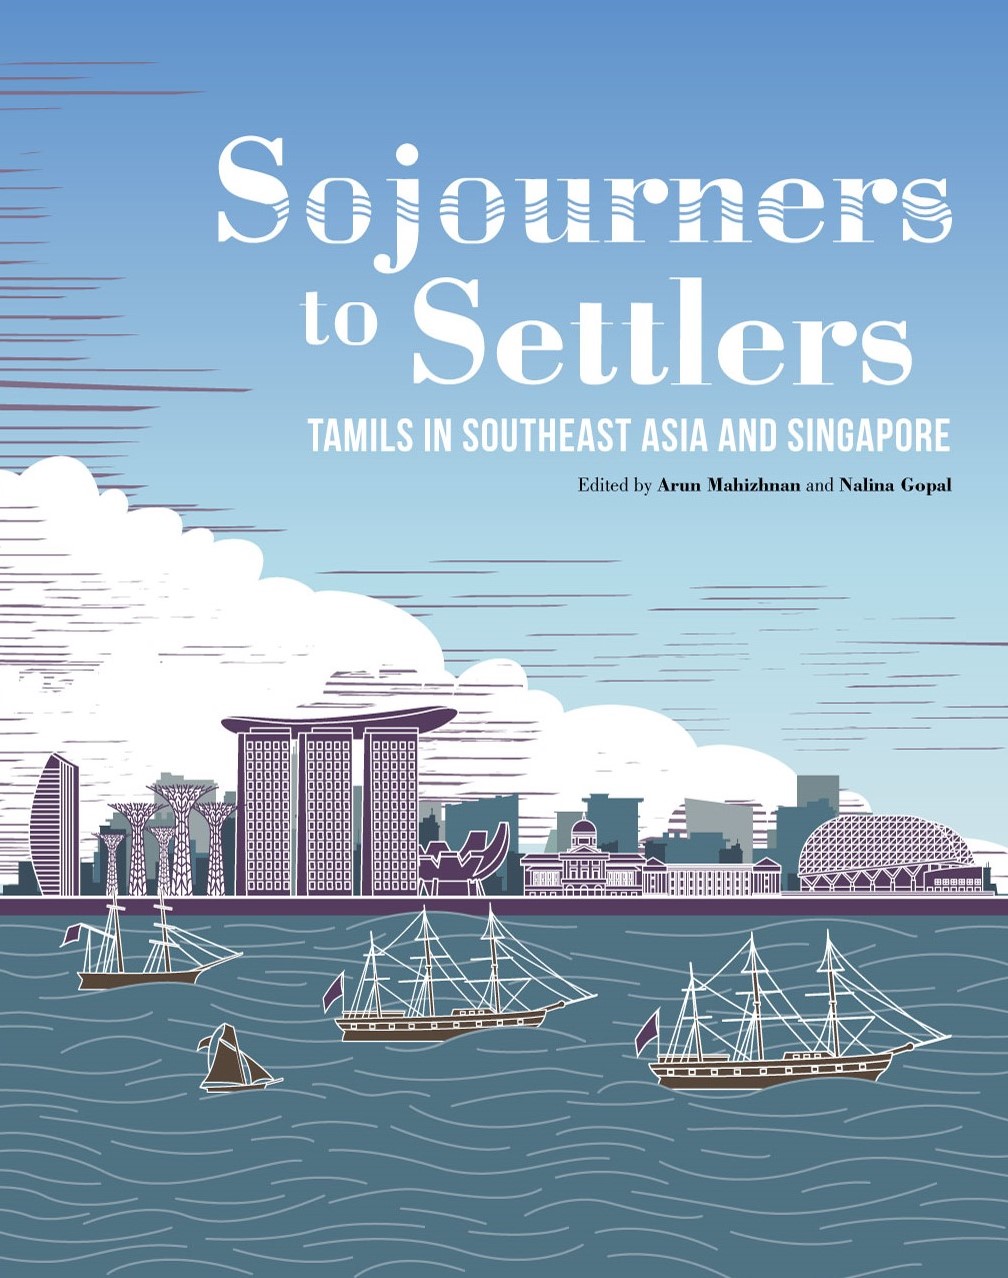 Sojourners to Settlers